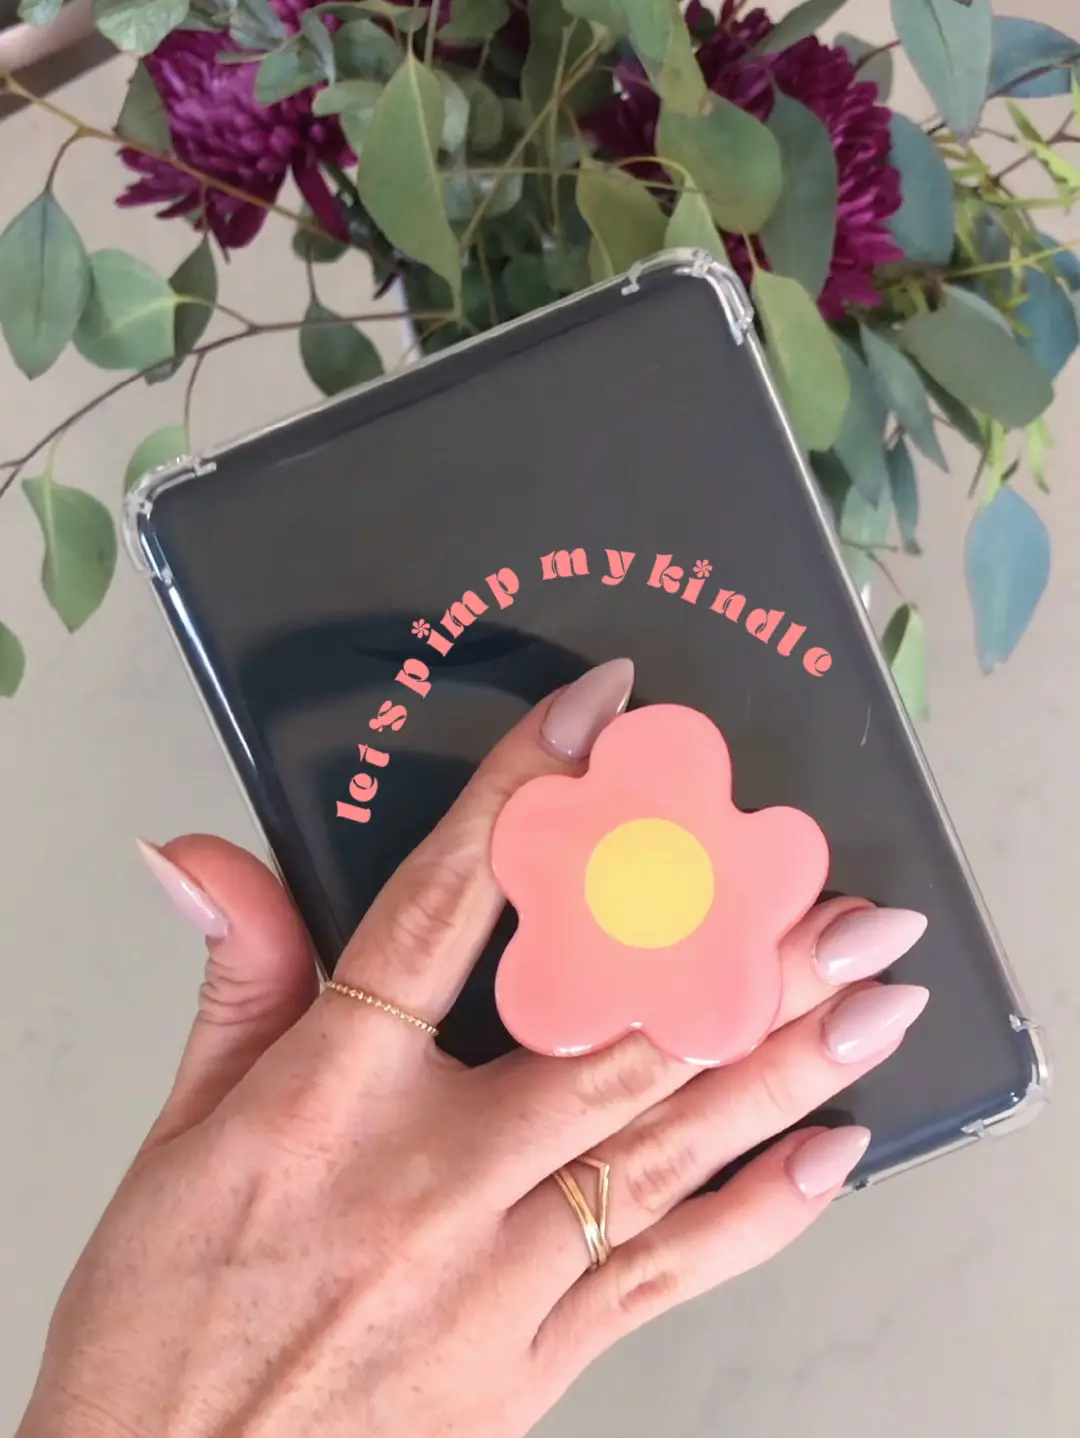 Pimp my Kindle: the cutest pop socket EVER 🌸, Video published by Courtney  Tice